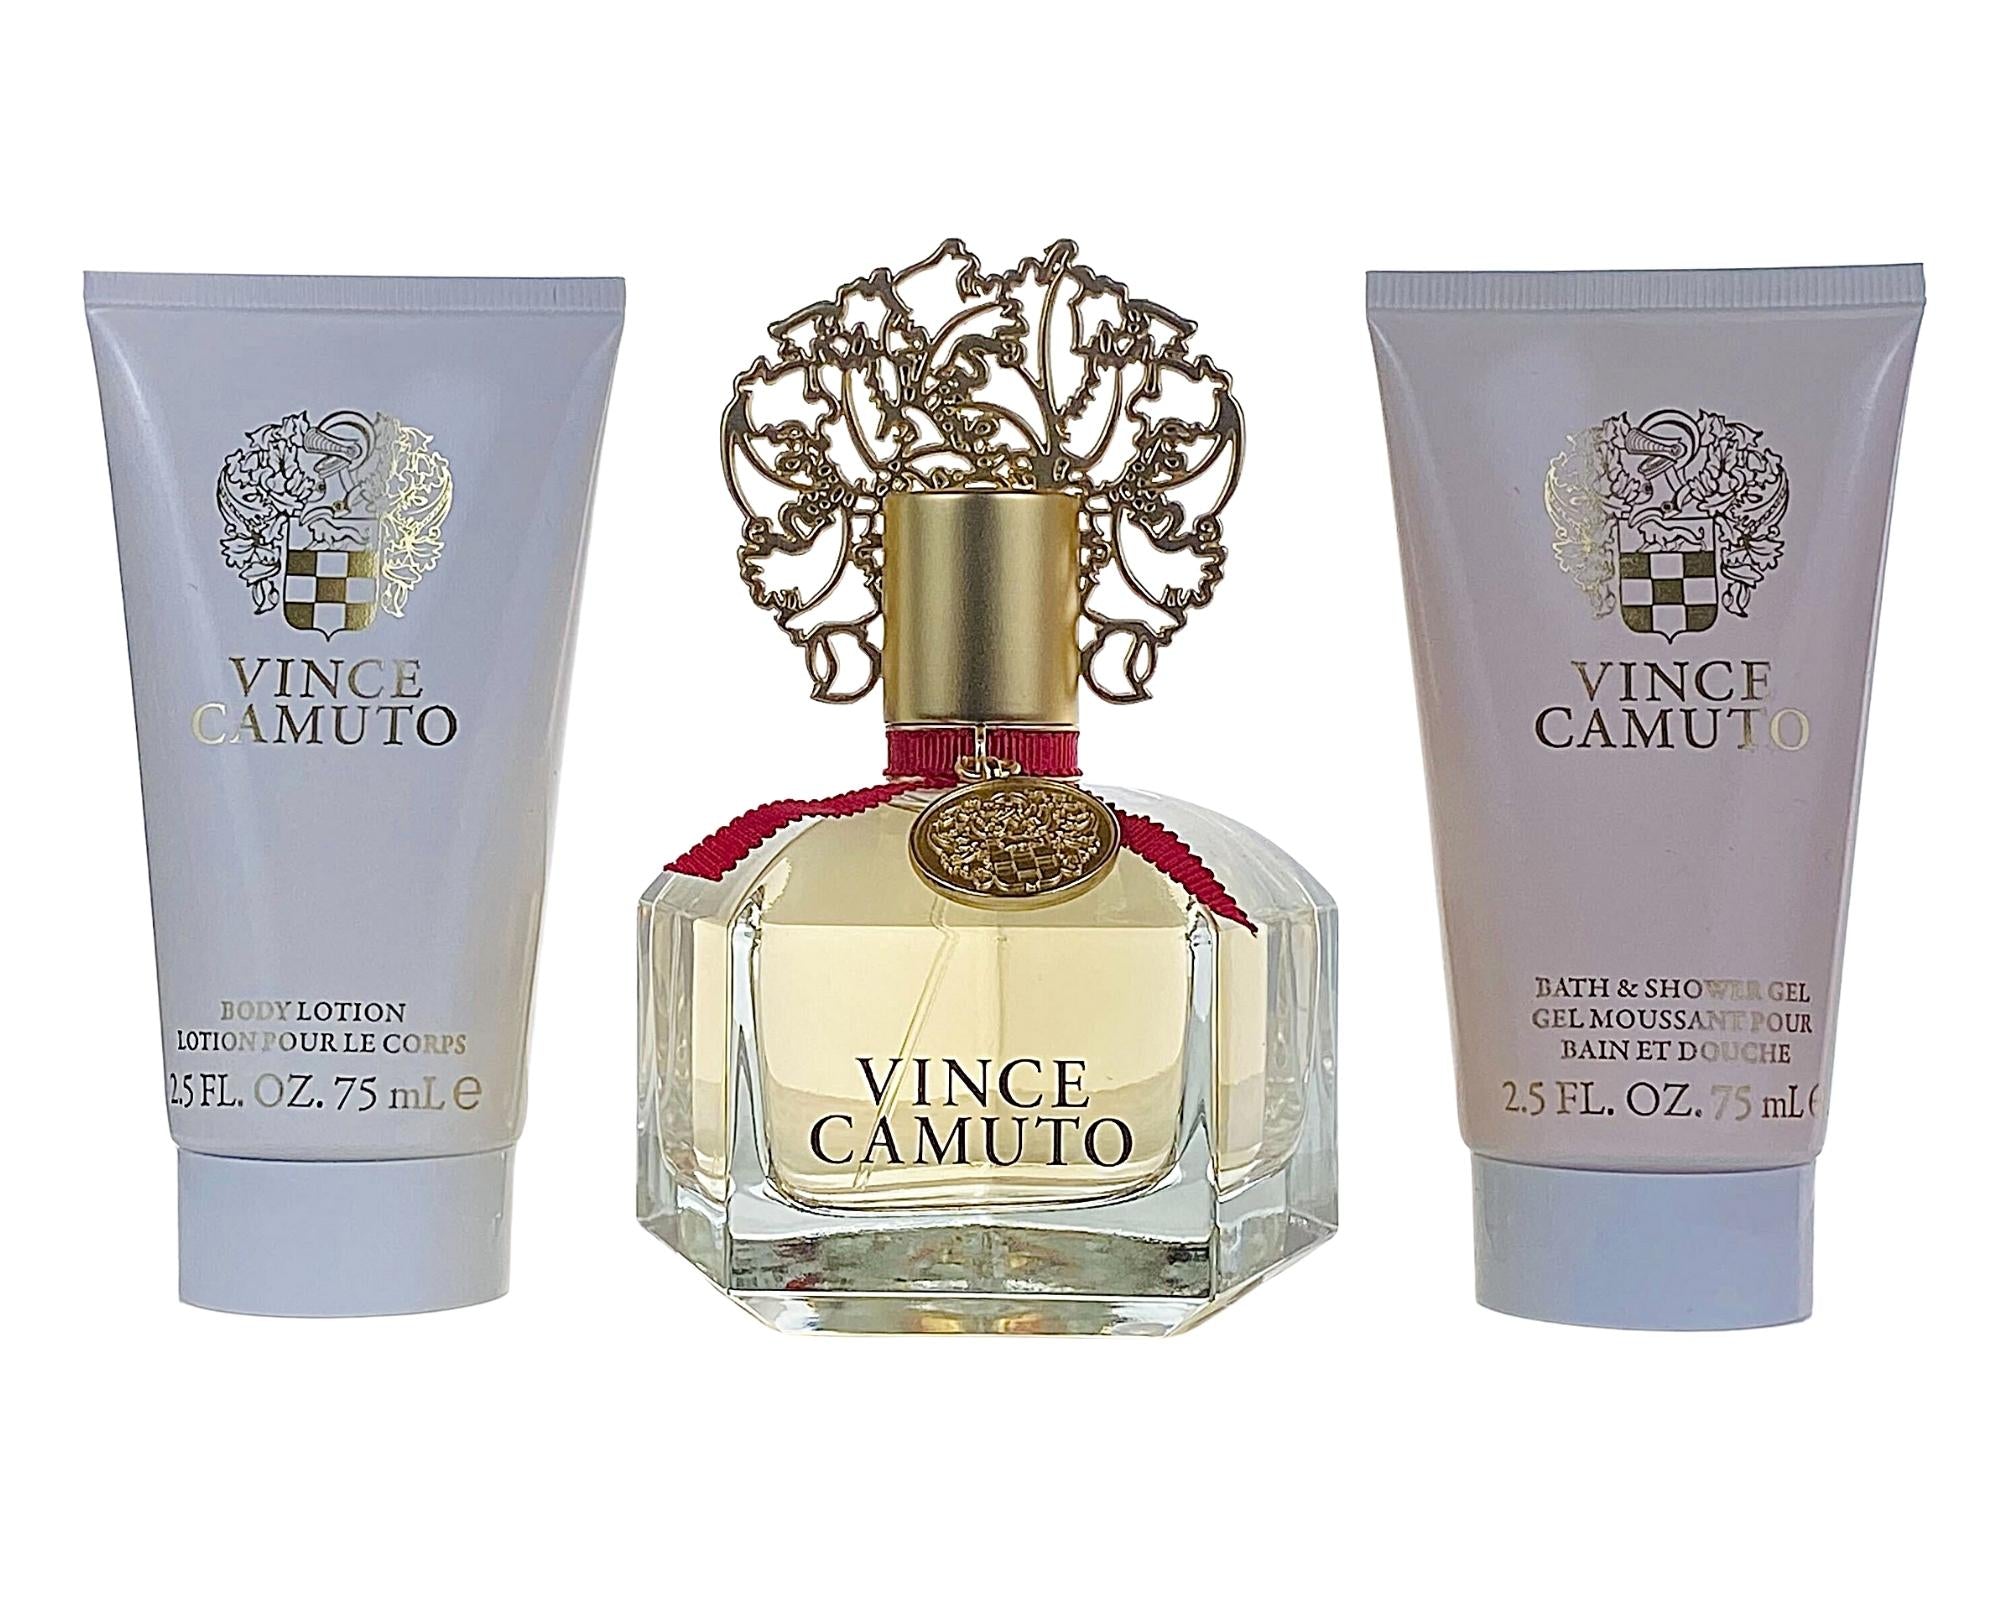 Vince Camuto 3 Pc. Gift Set by Vince Camuto for Women